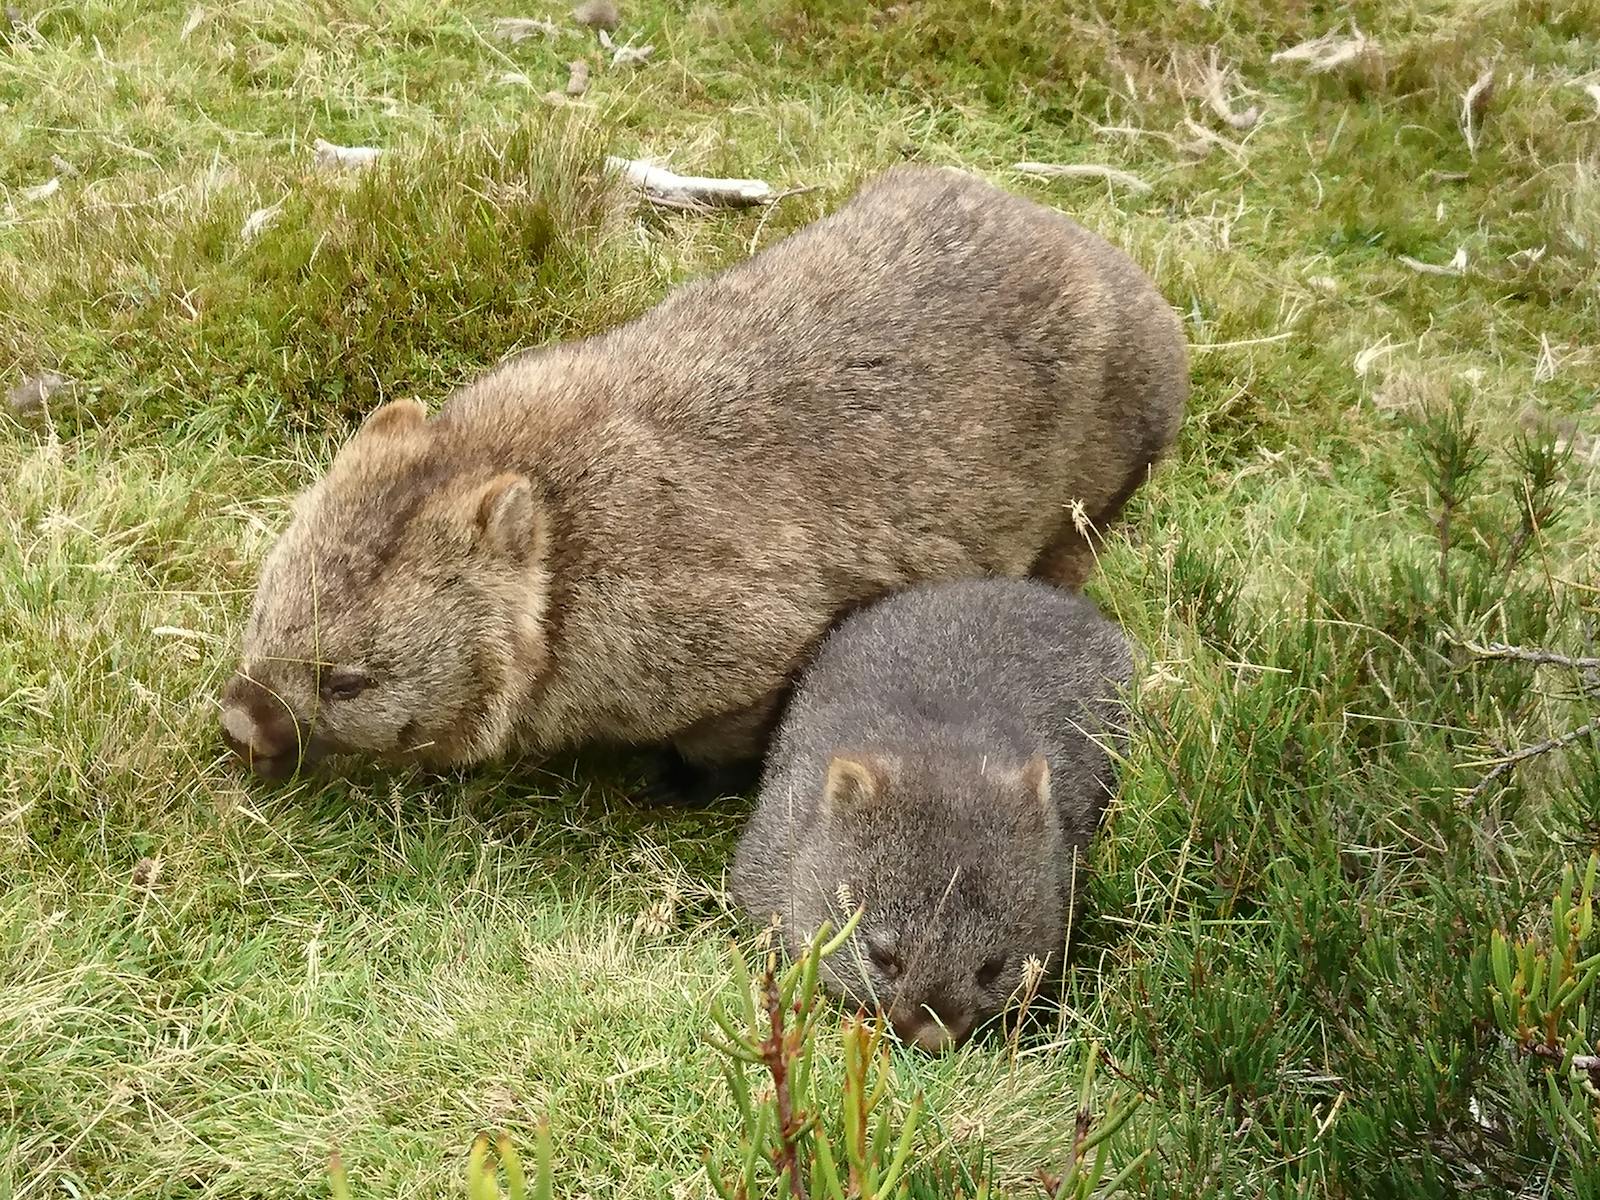 Mother and baby wombat at Cradle Mountain